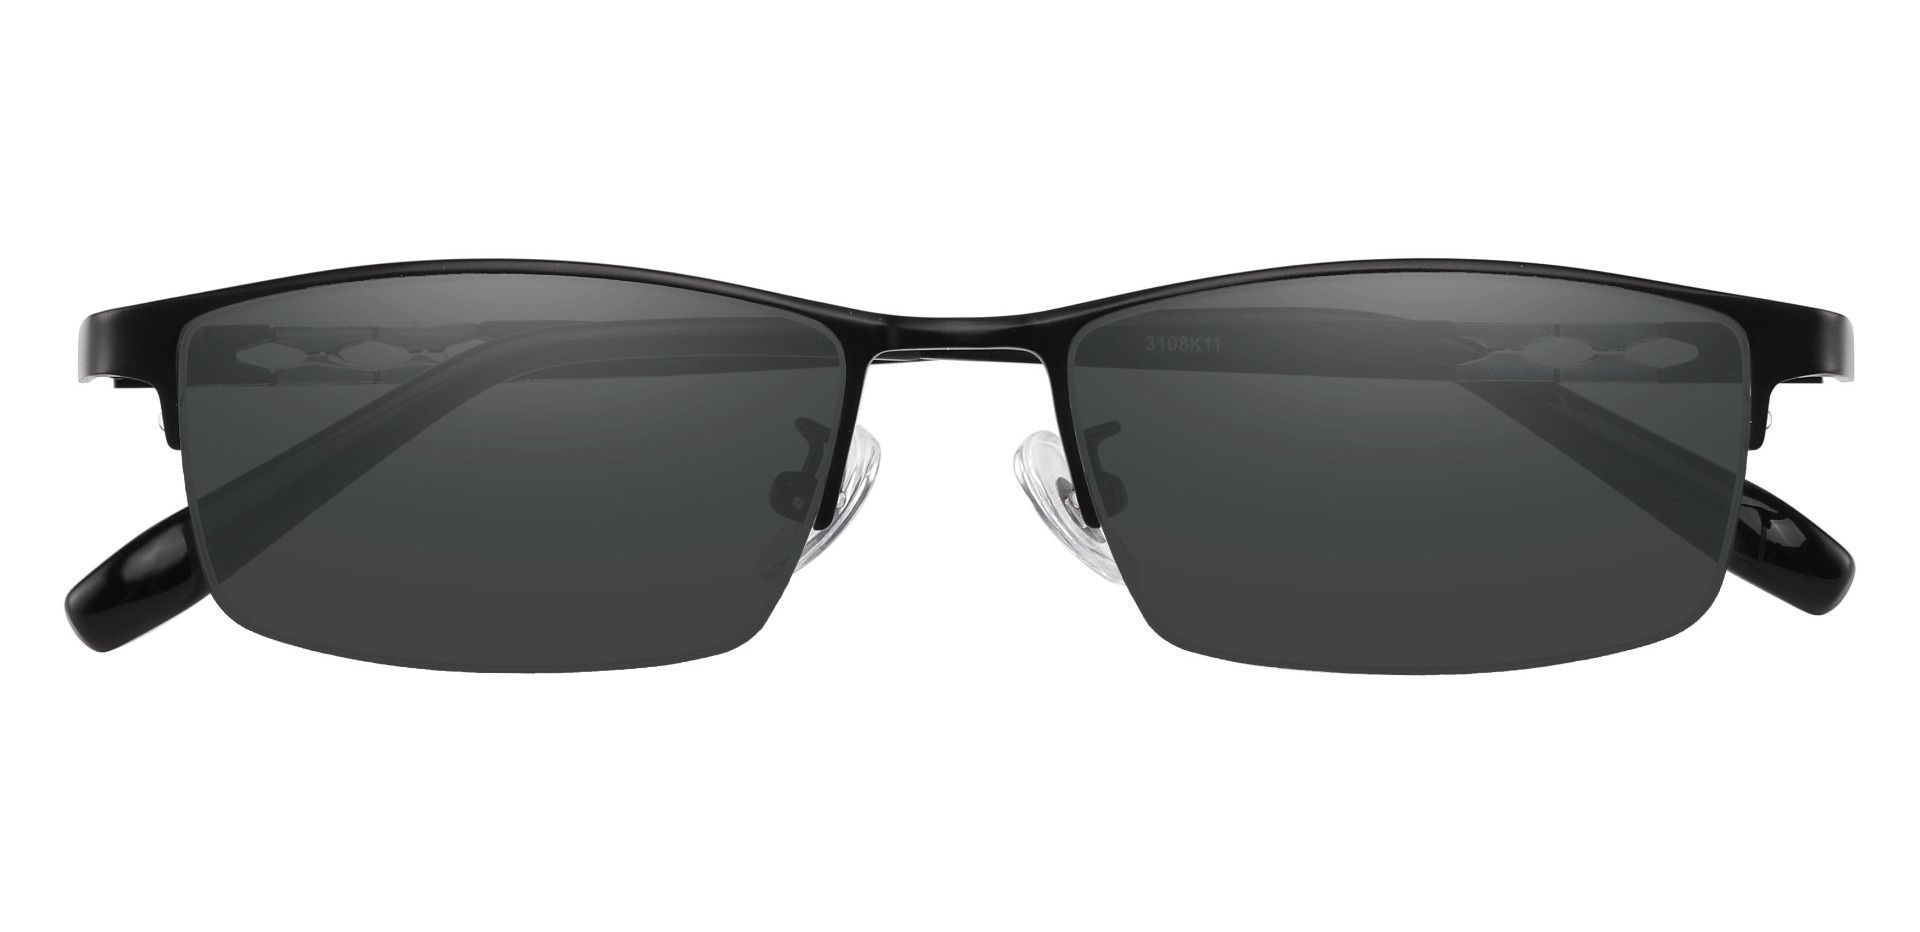 Fremont TheraSpecs Glasses with Therapeutic Lenses for Relief